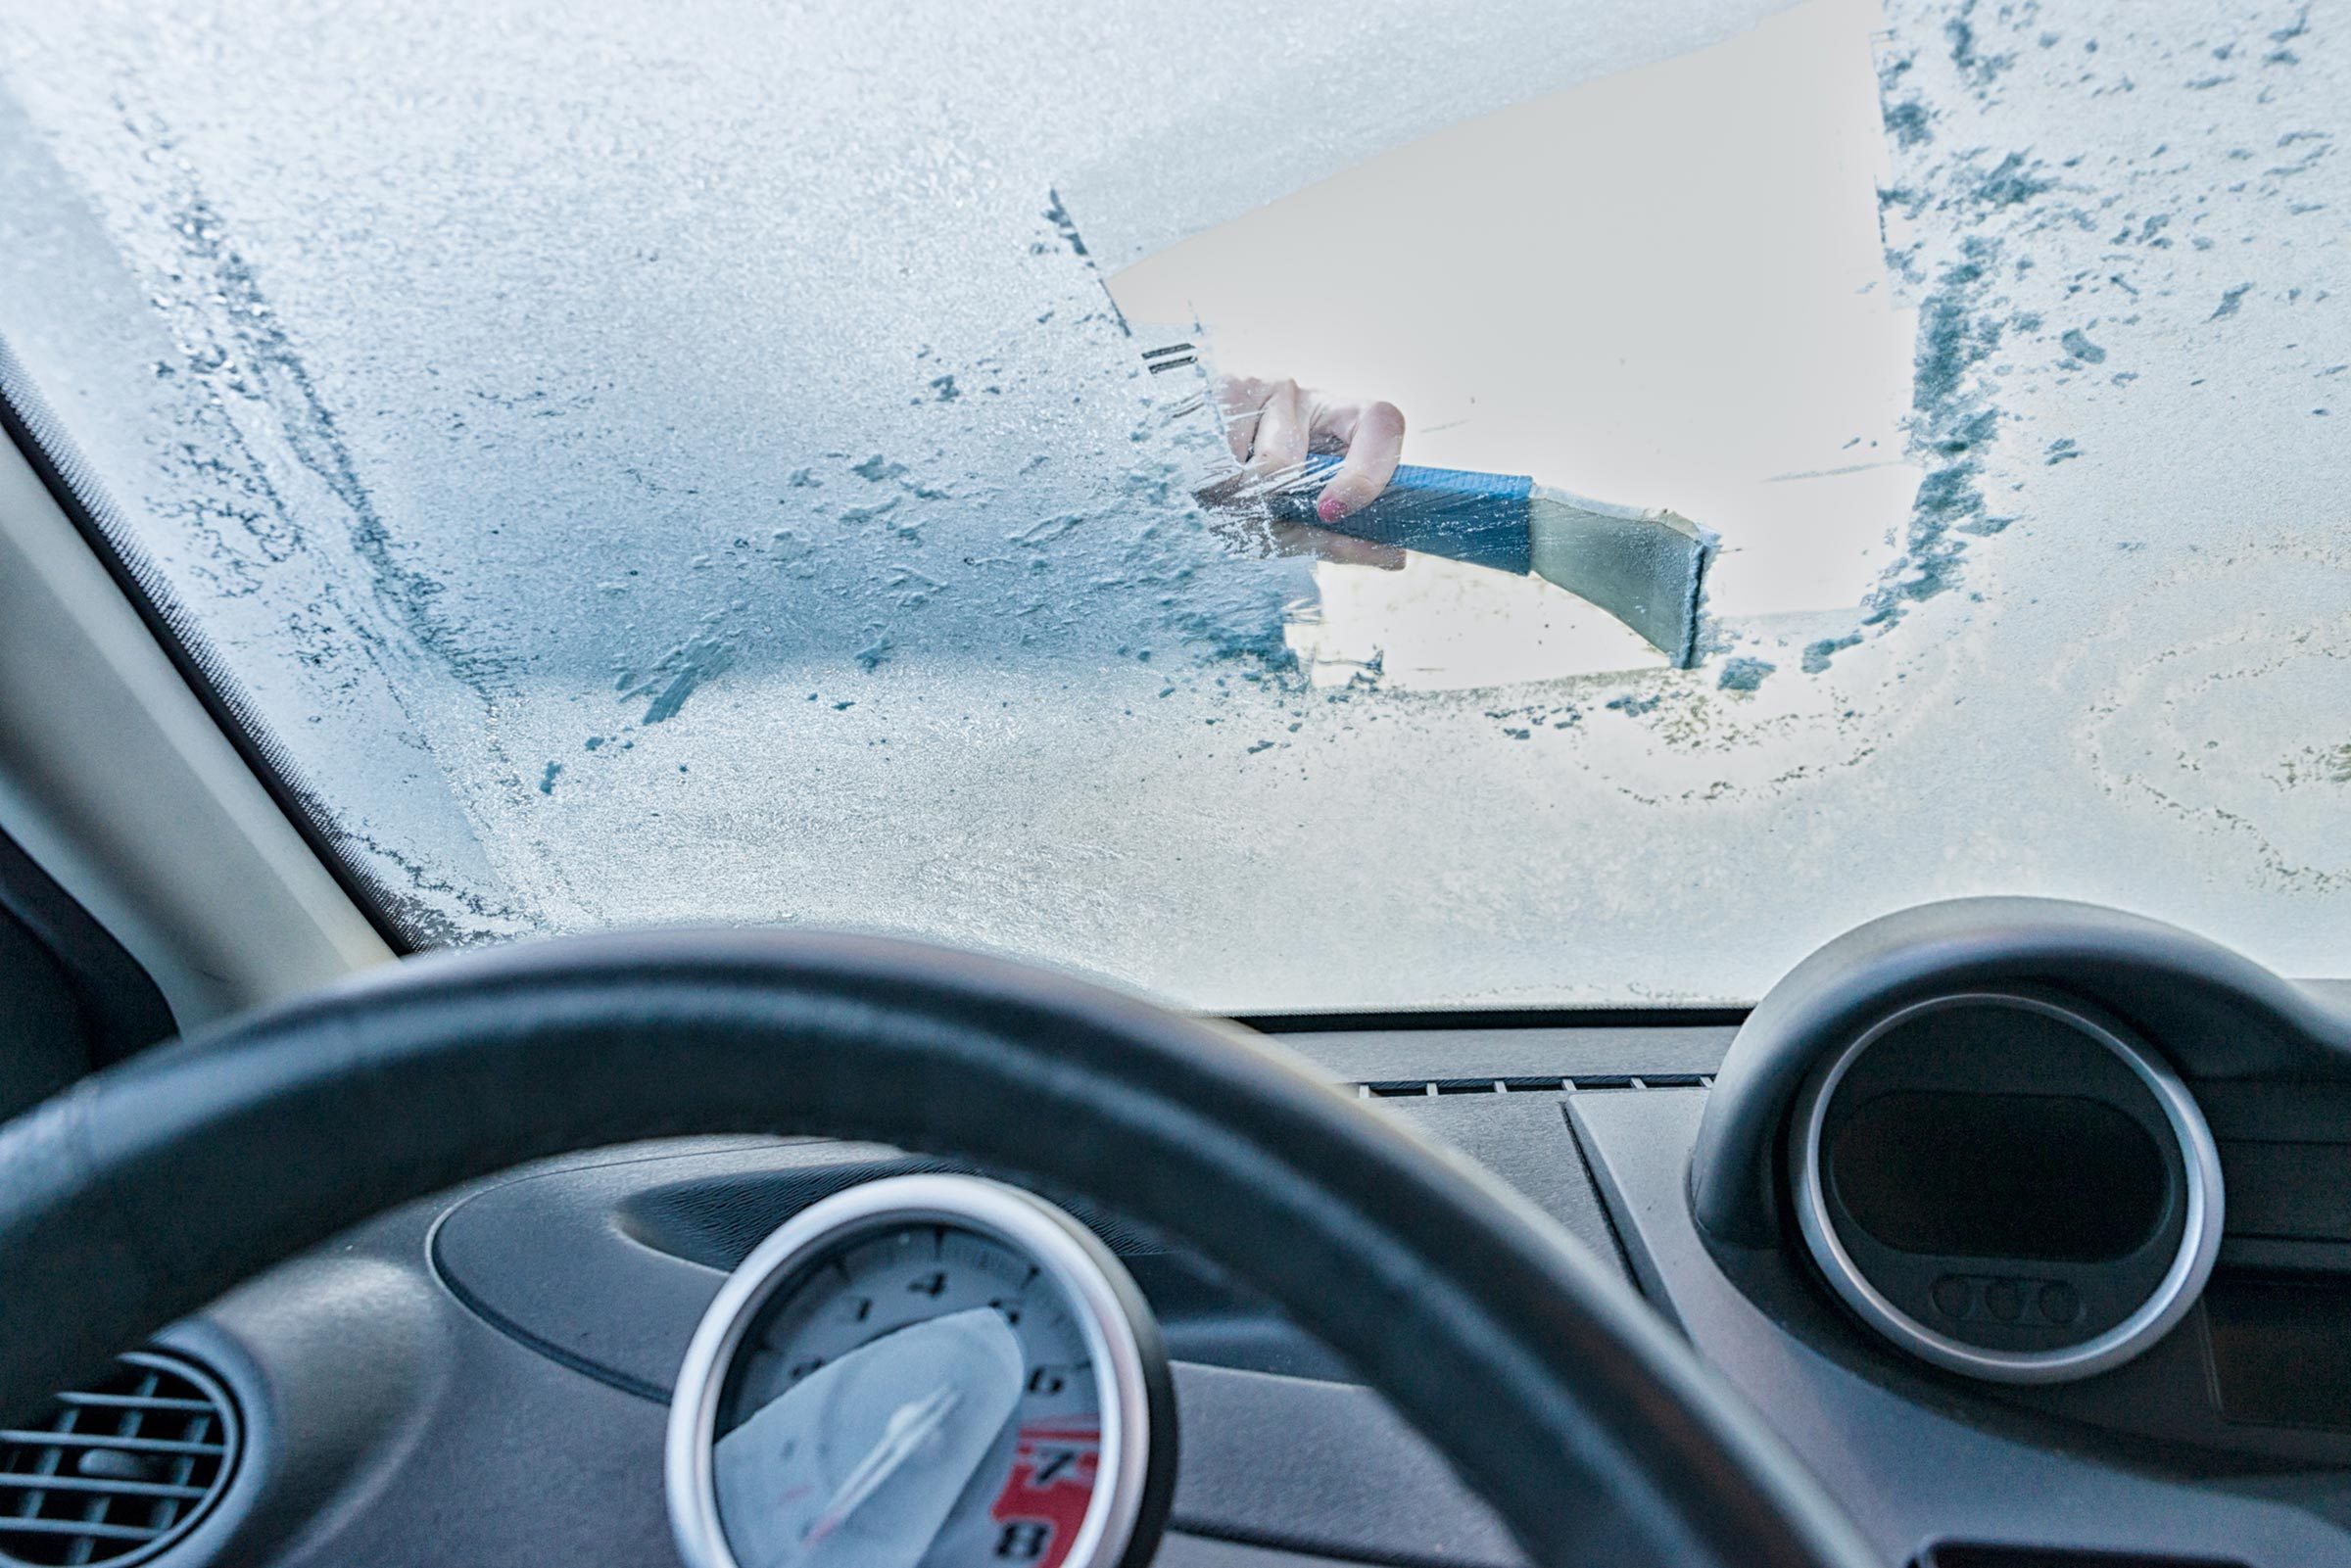 4 ways to defrost car windows in an eco-friendly way – The Waste